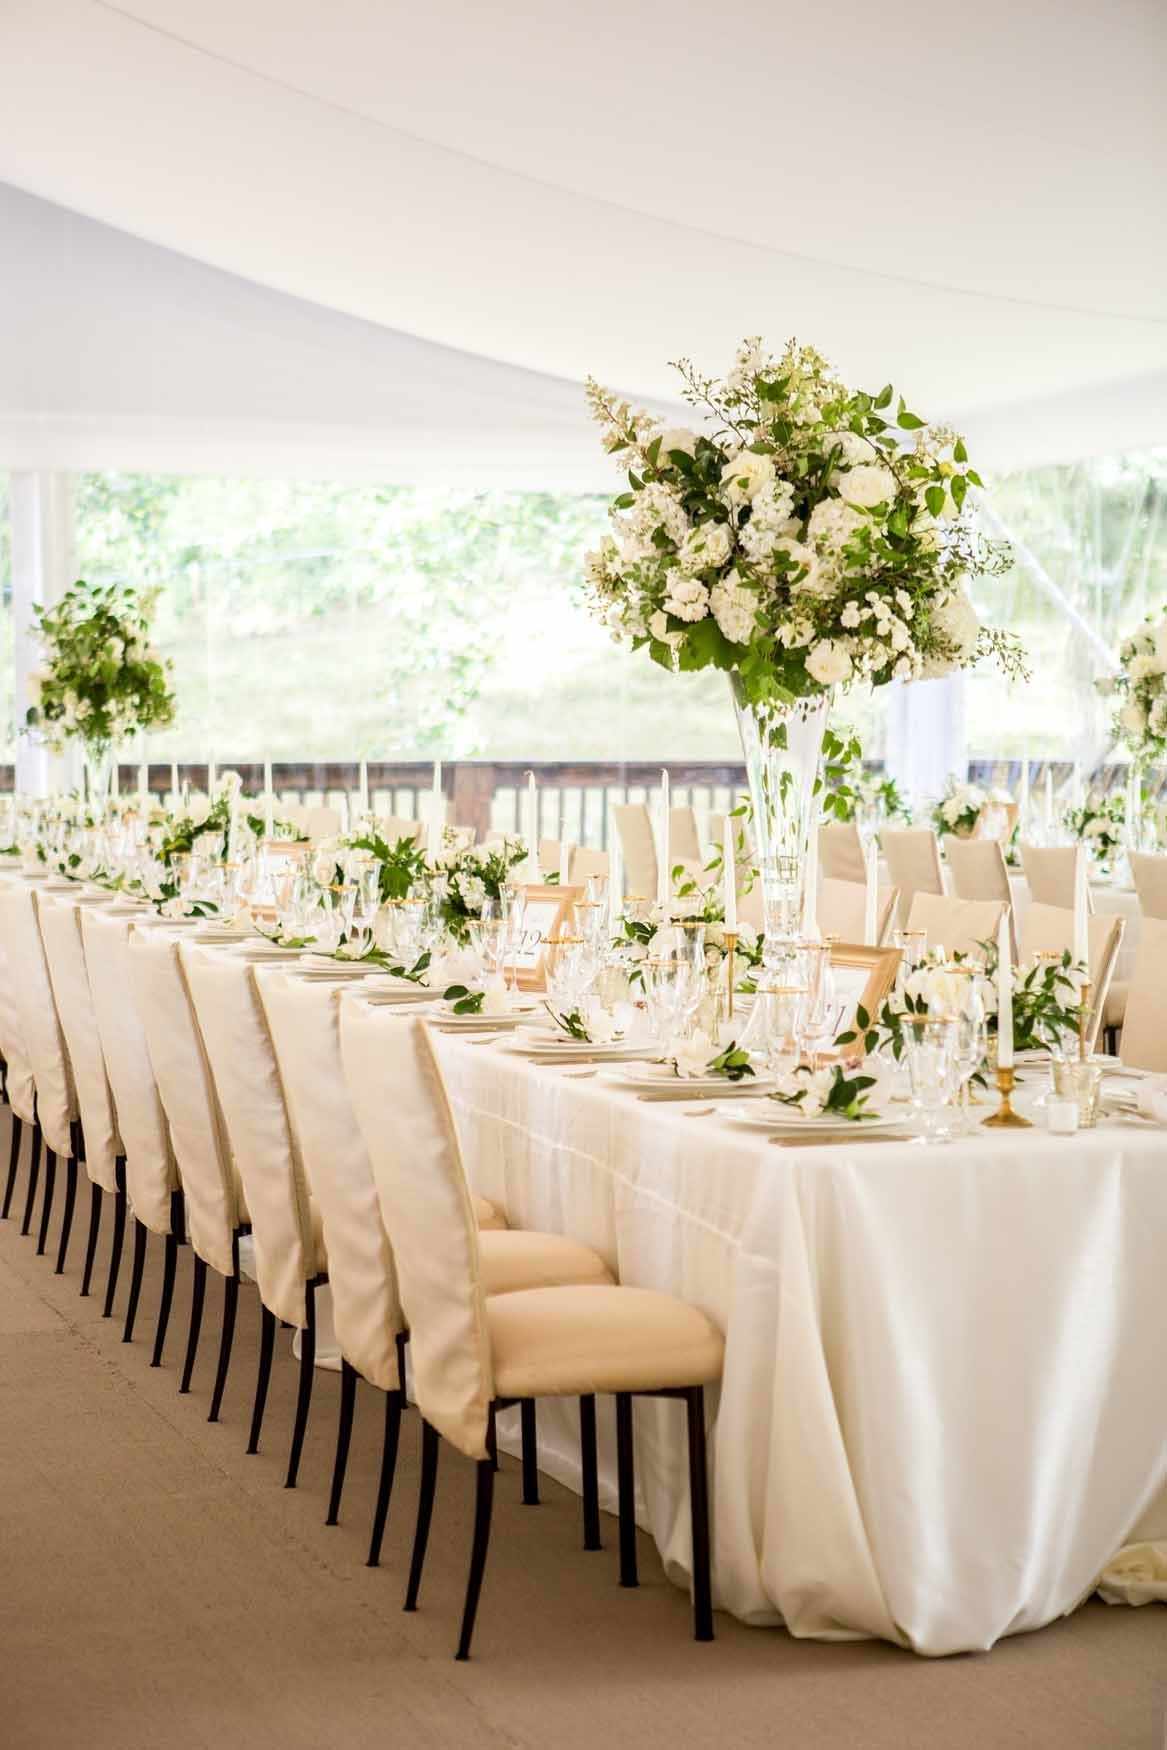 White summer tent wedding reception with white and green floral